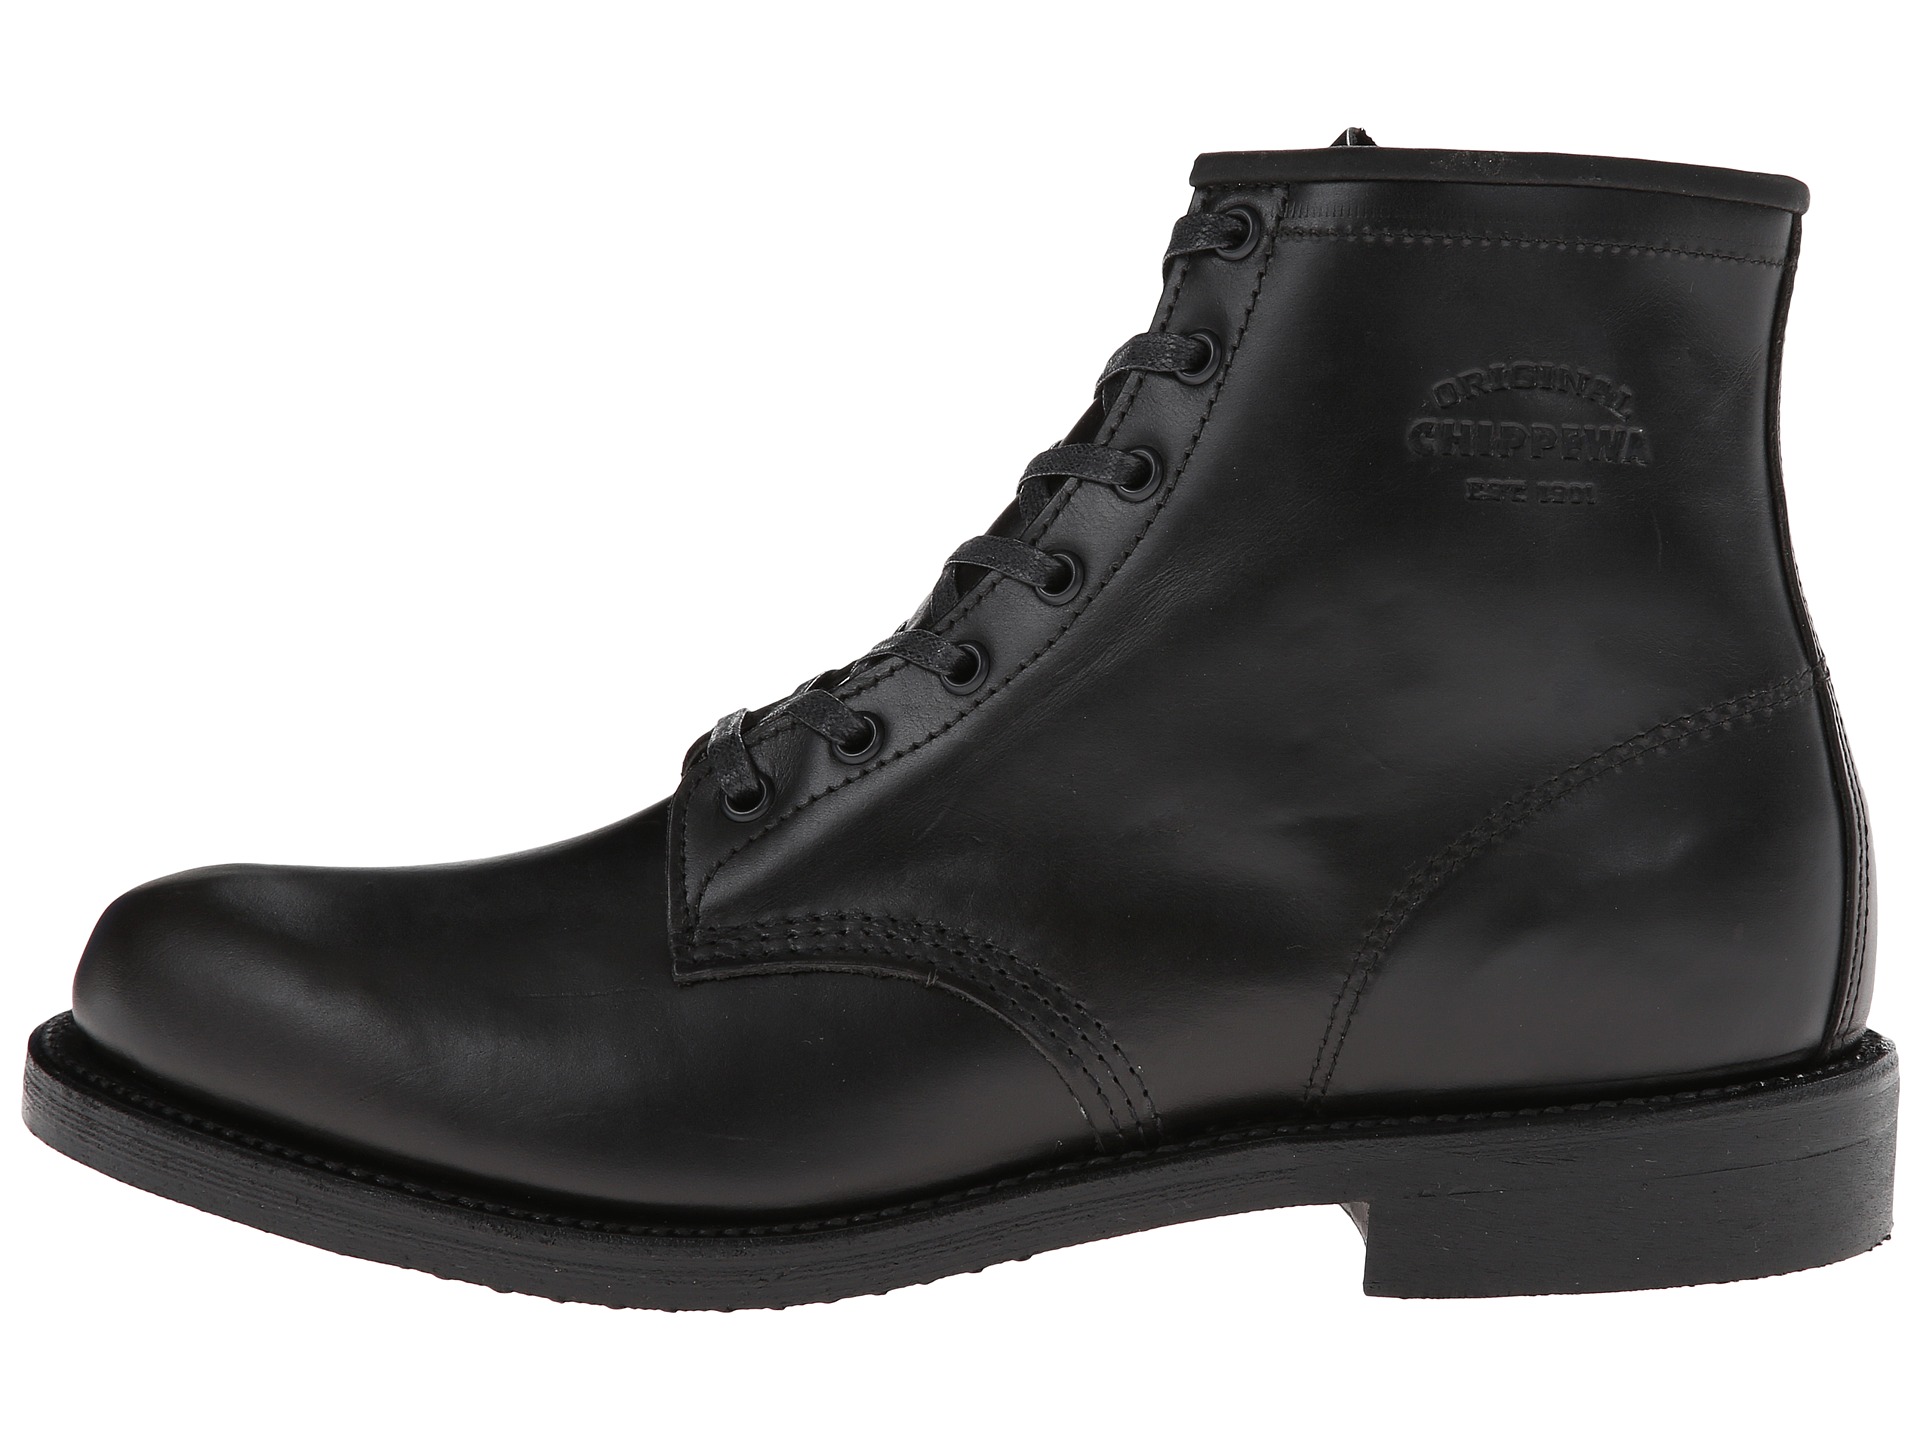 Chippewa Service Boot Tropper Black, Shoes, Men | Shipped Free at Zappos